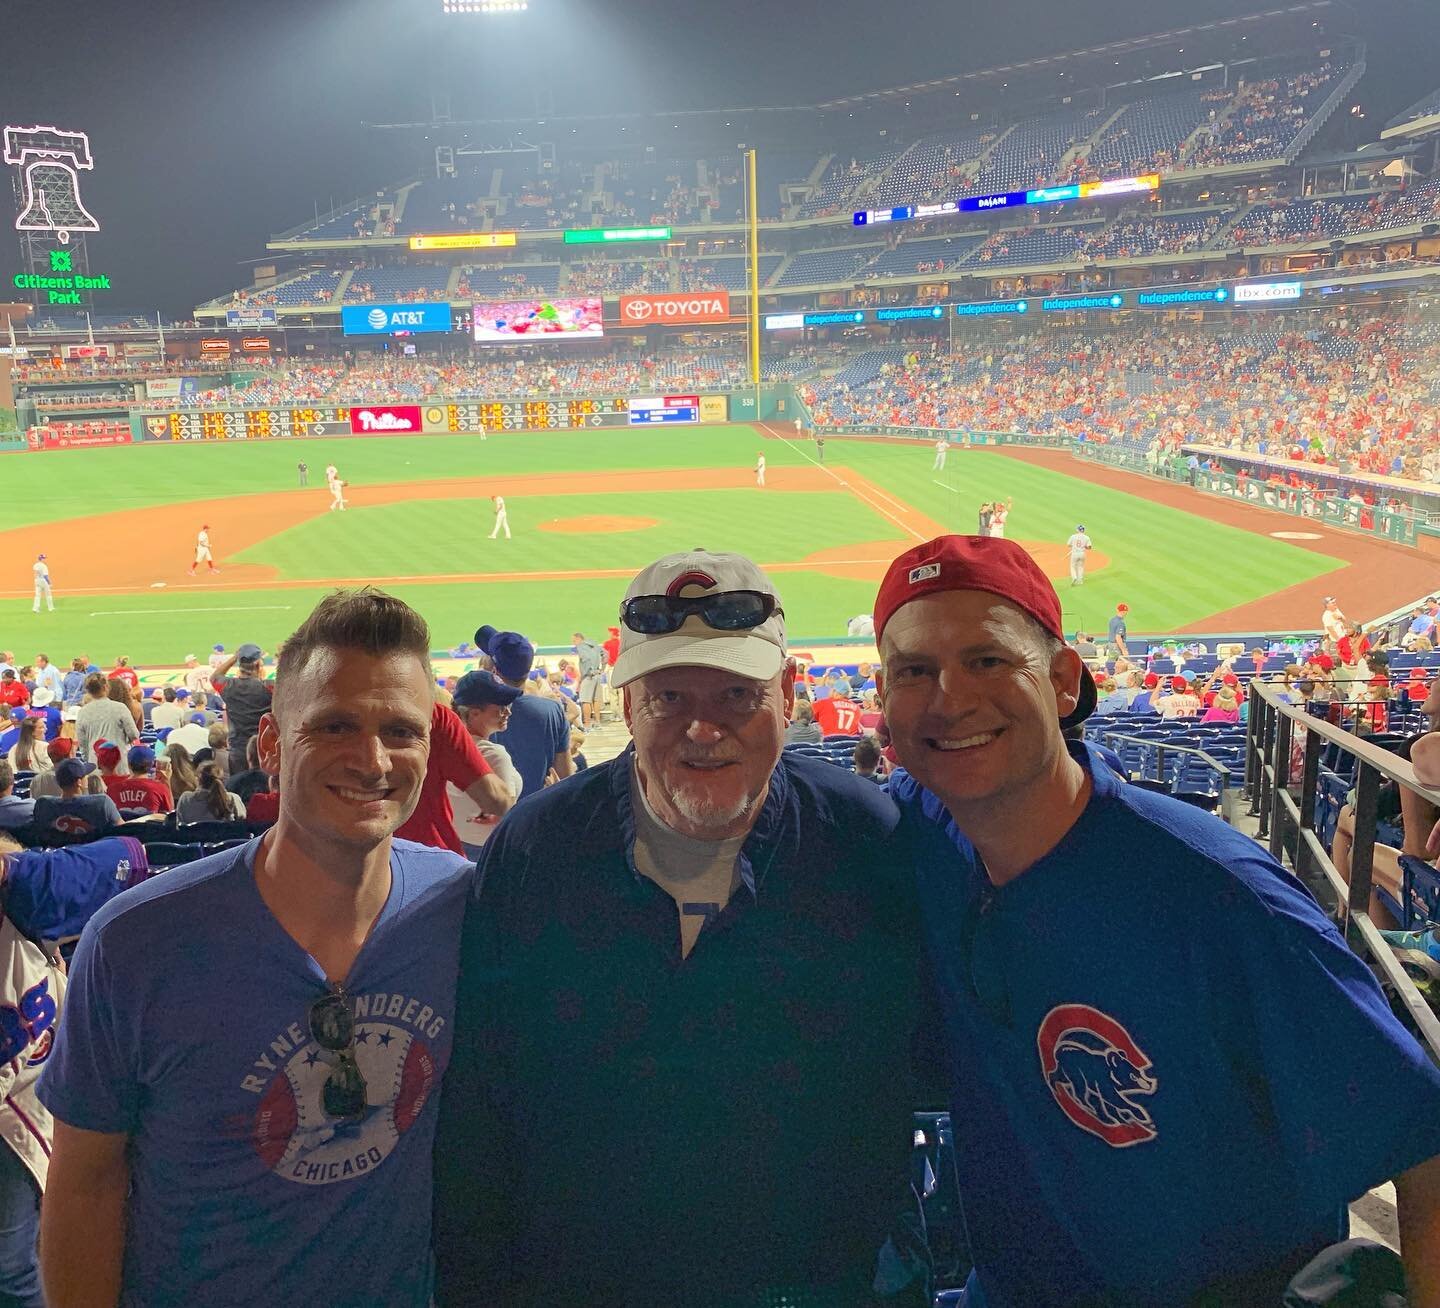 Tough night for the @cubs but my first visit to @citizensbankpark was a great one! No better place to be than the ballpark.